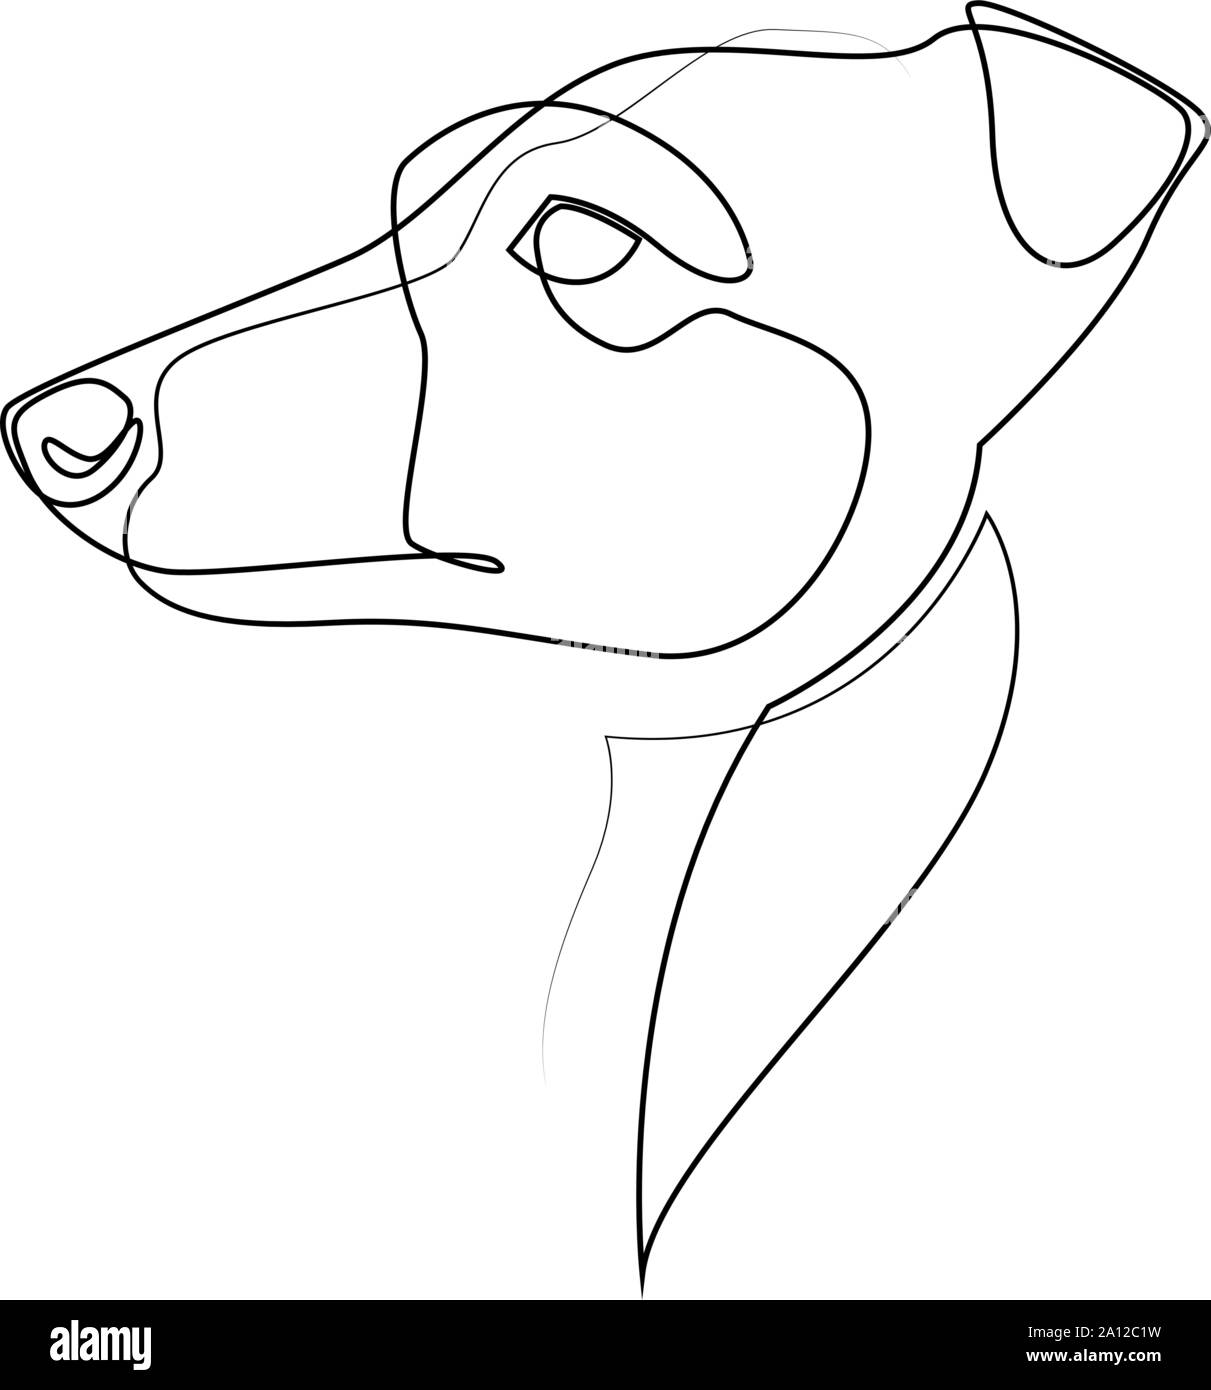 Continuous line Whippet. Single line minimal style English Whippet or Snap dog vector illustration Stock Vector